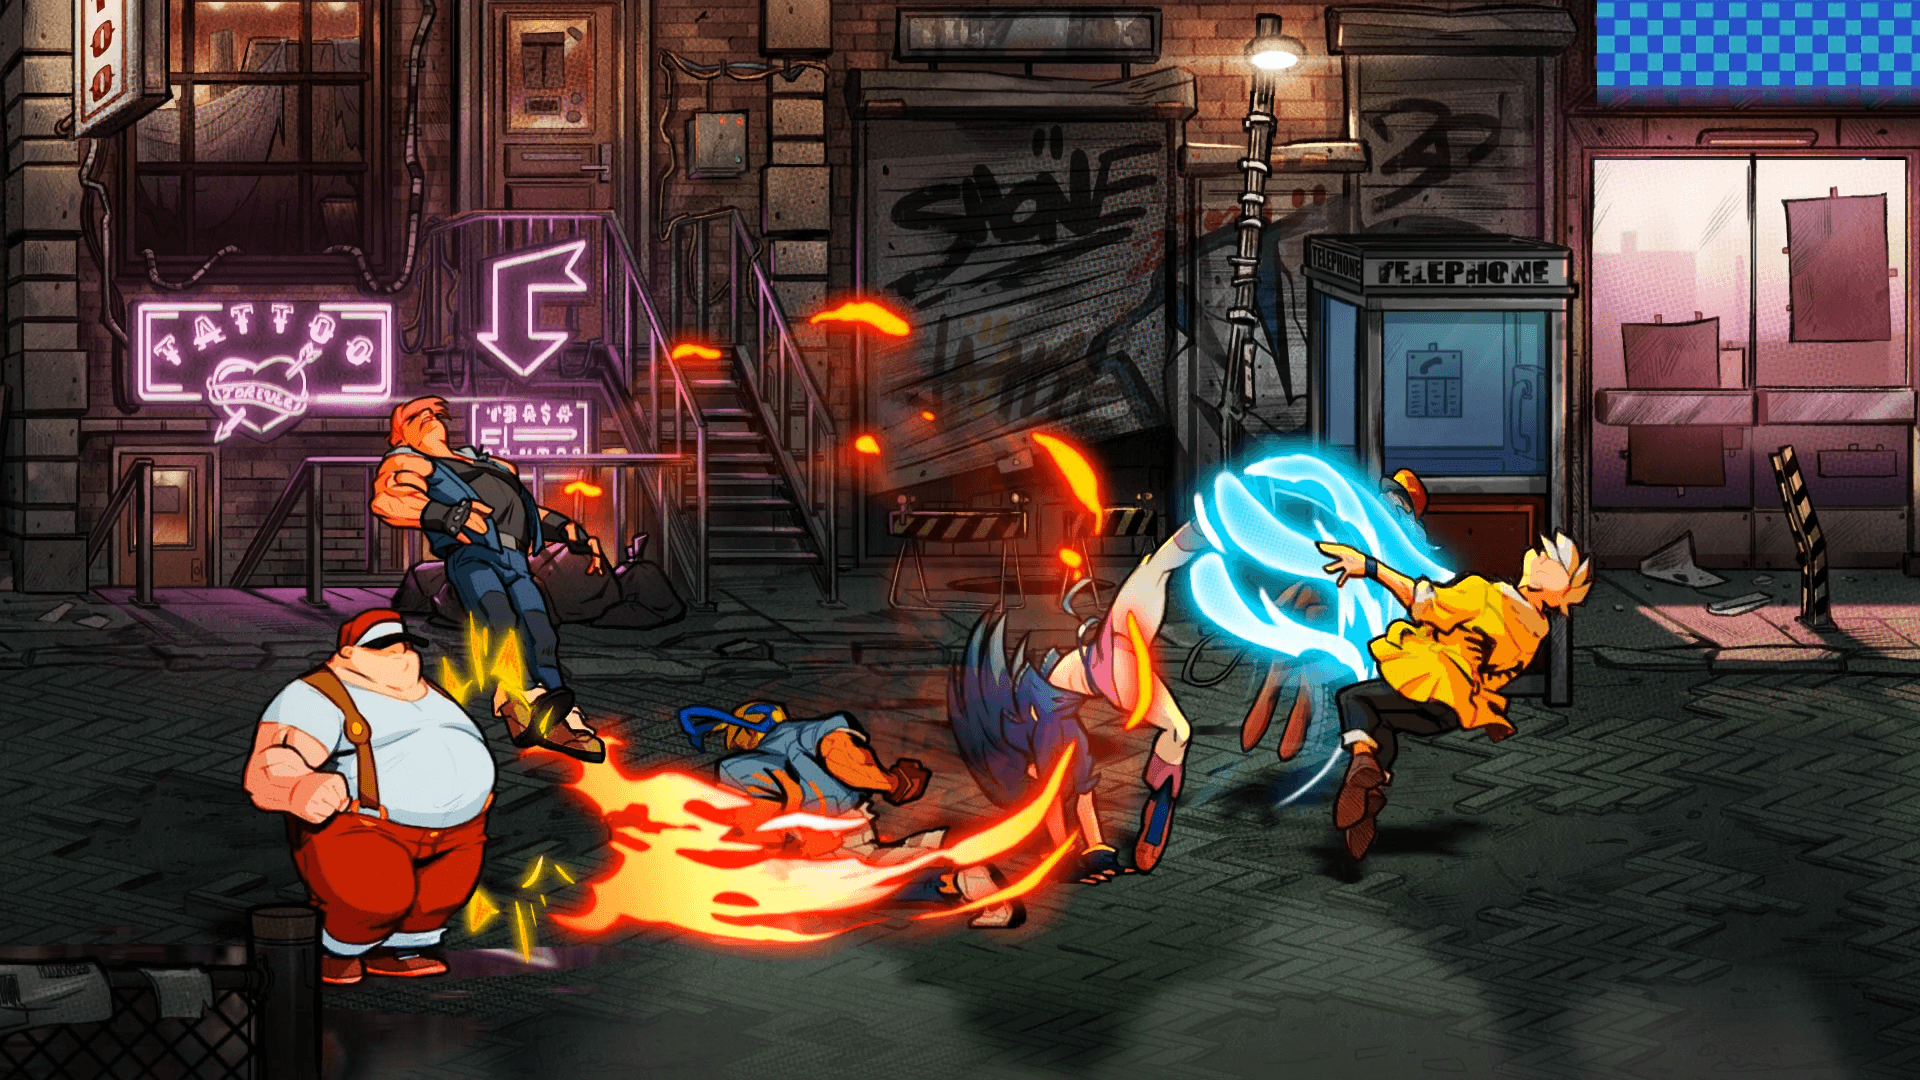 Streets of Rage 4 Screenshots, Picture, Wallpaper 4